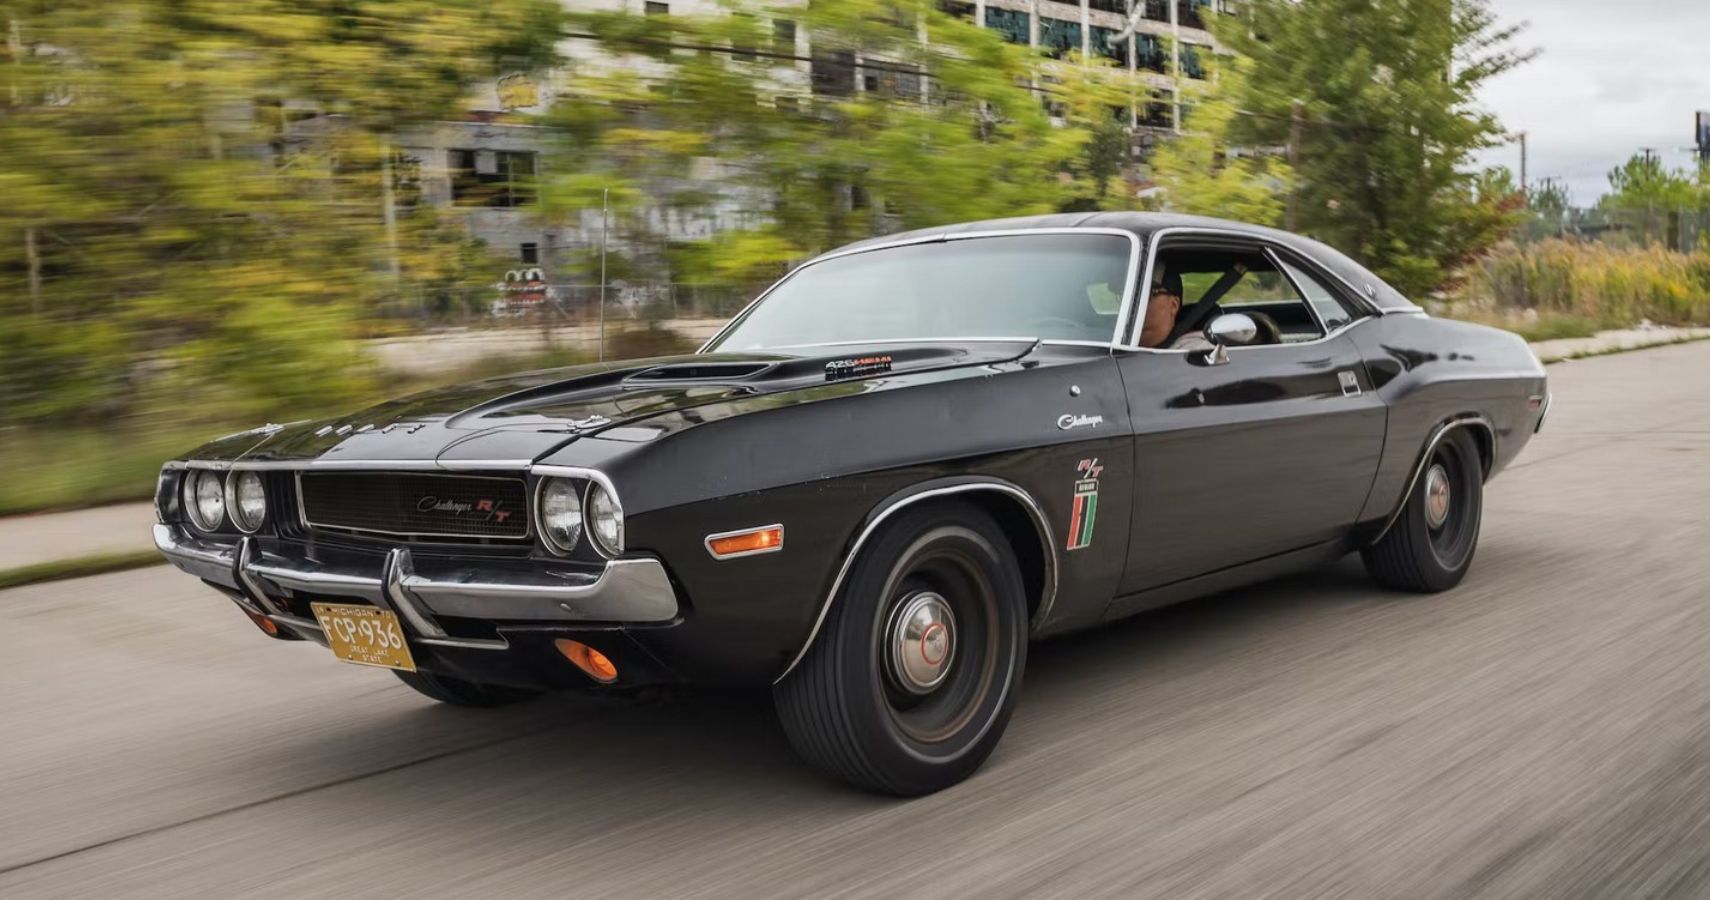 The Dodge Challenger Black Ghost Sells For 975,000 At Auction